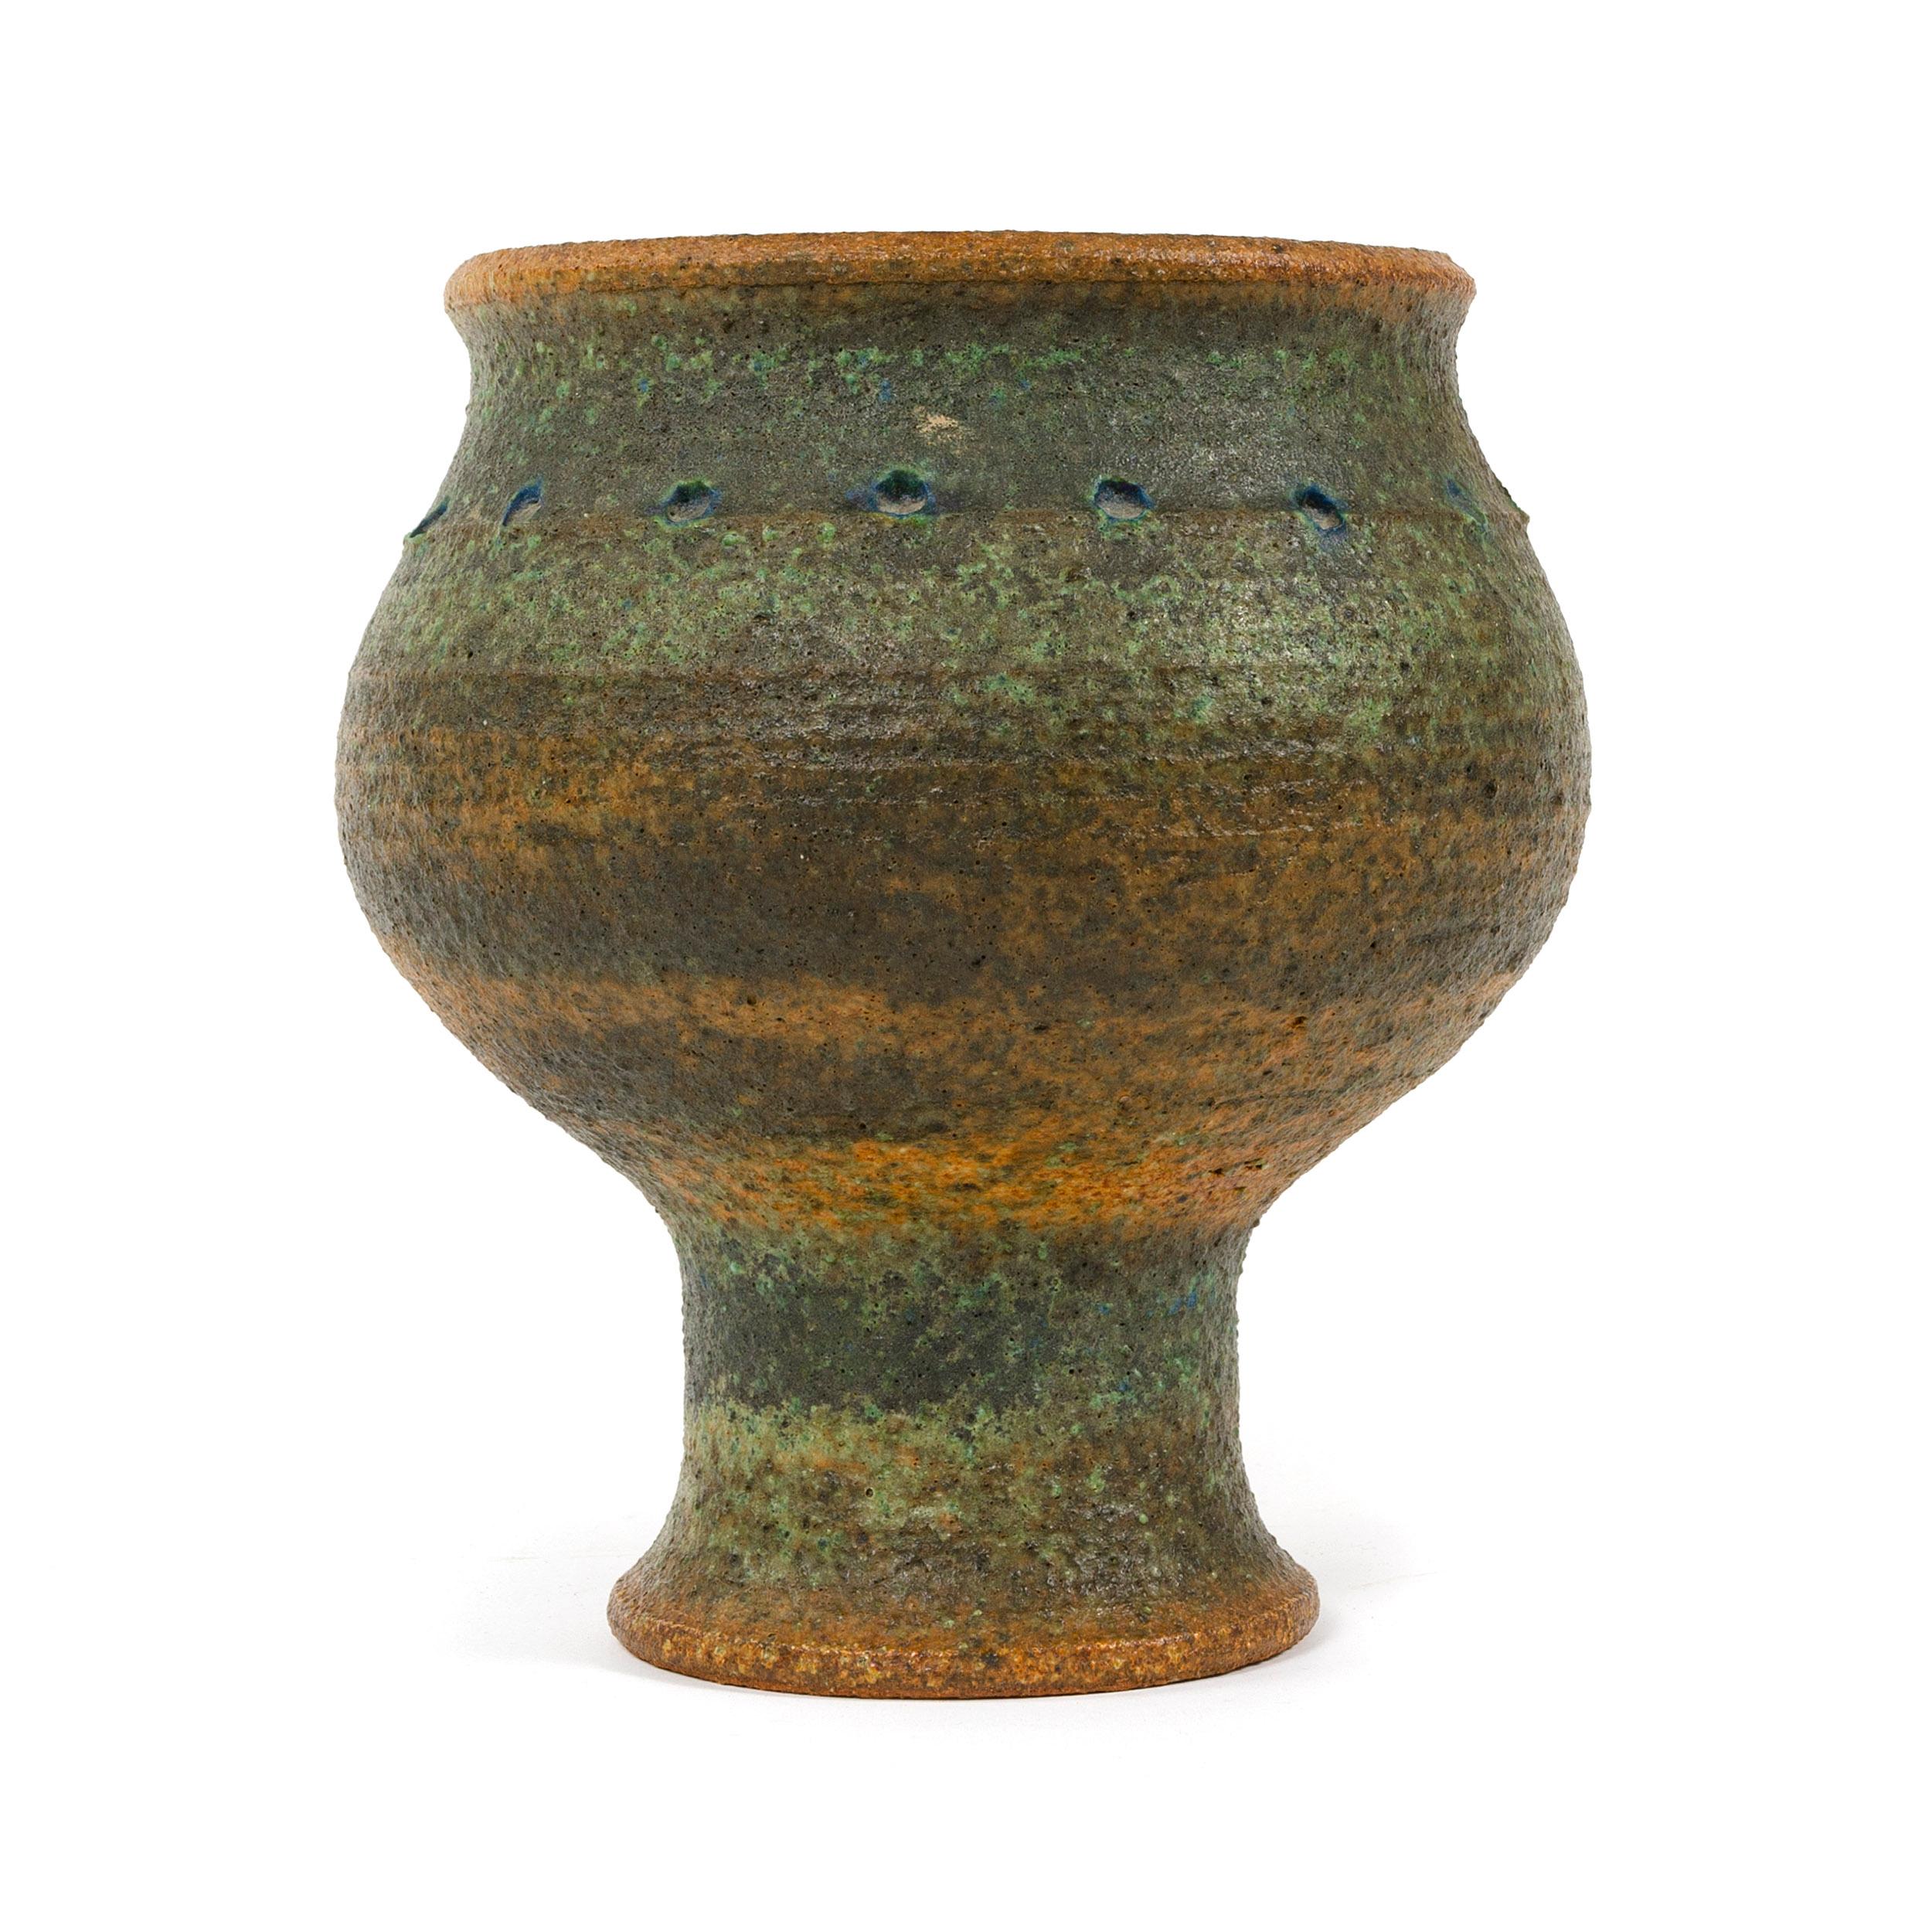 A Mid-Century Modern hand-thrown, studio-made footed stoneware vessel with a rustic and textured glaze. Made by Arabia in Finland, 1960s.
Base diameter is 4.25